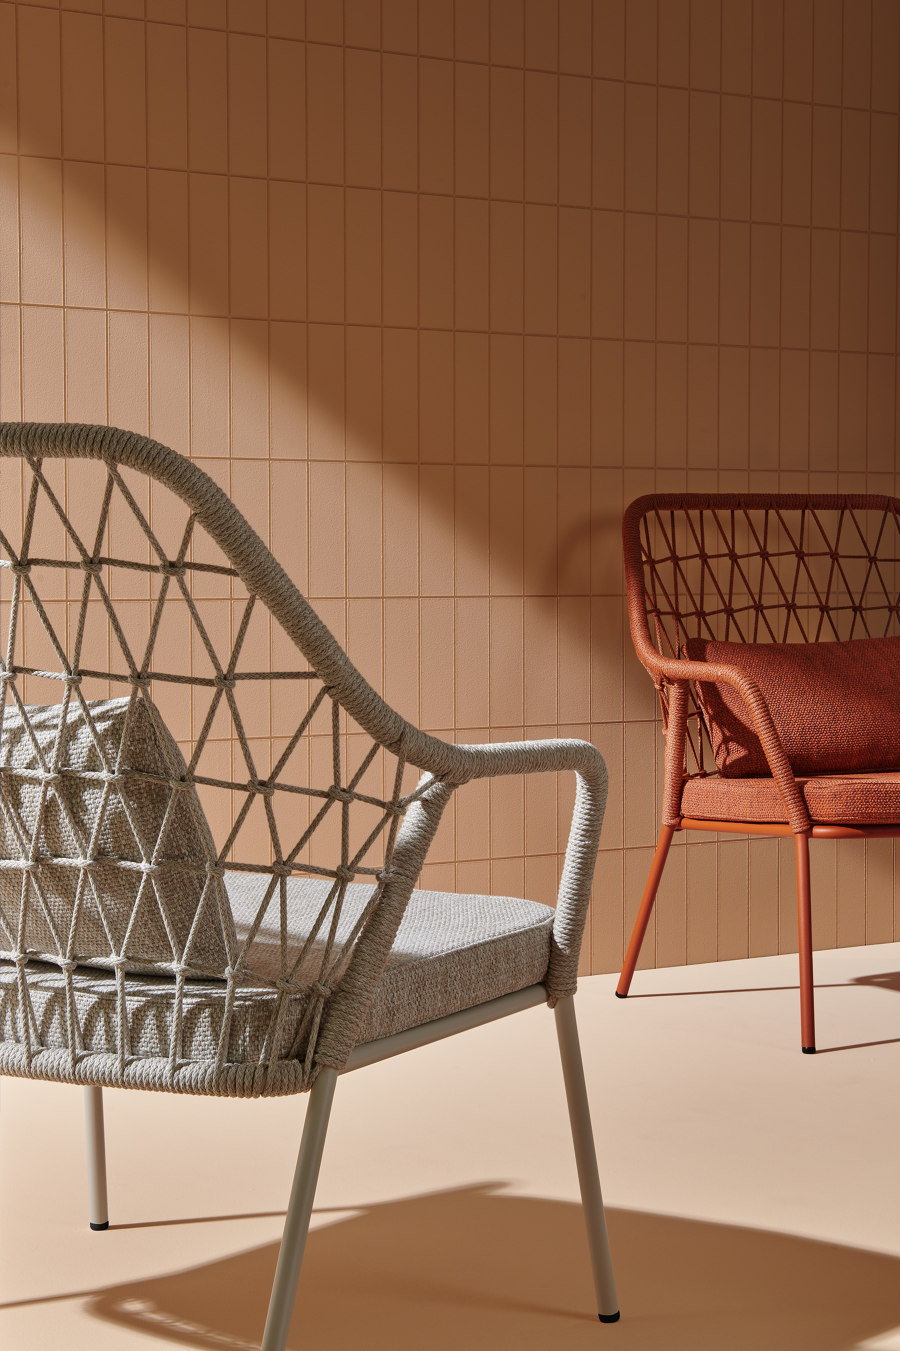 It's elementary: new outdoor furniture from Pedrali | Nouveautés